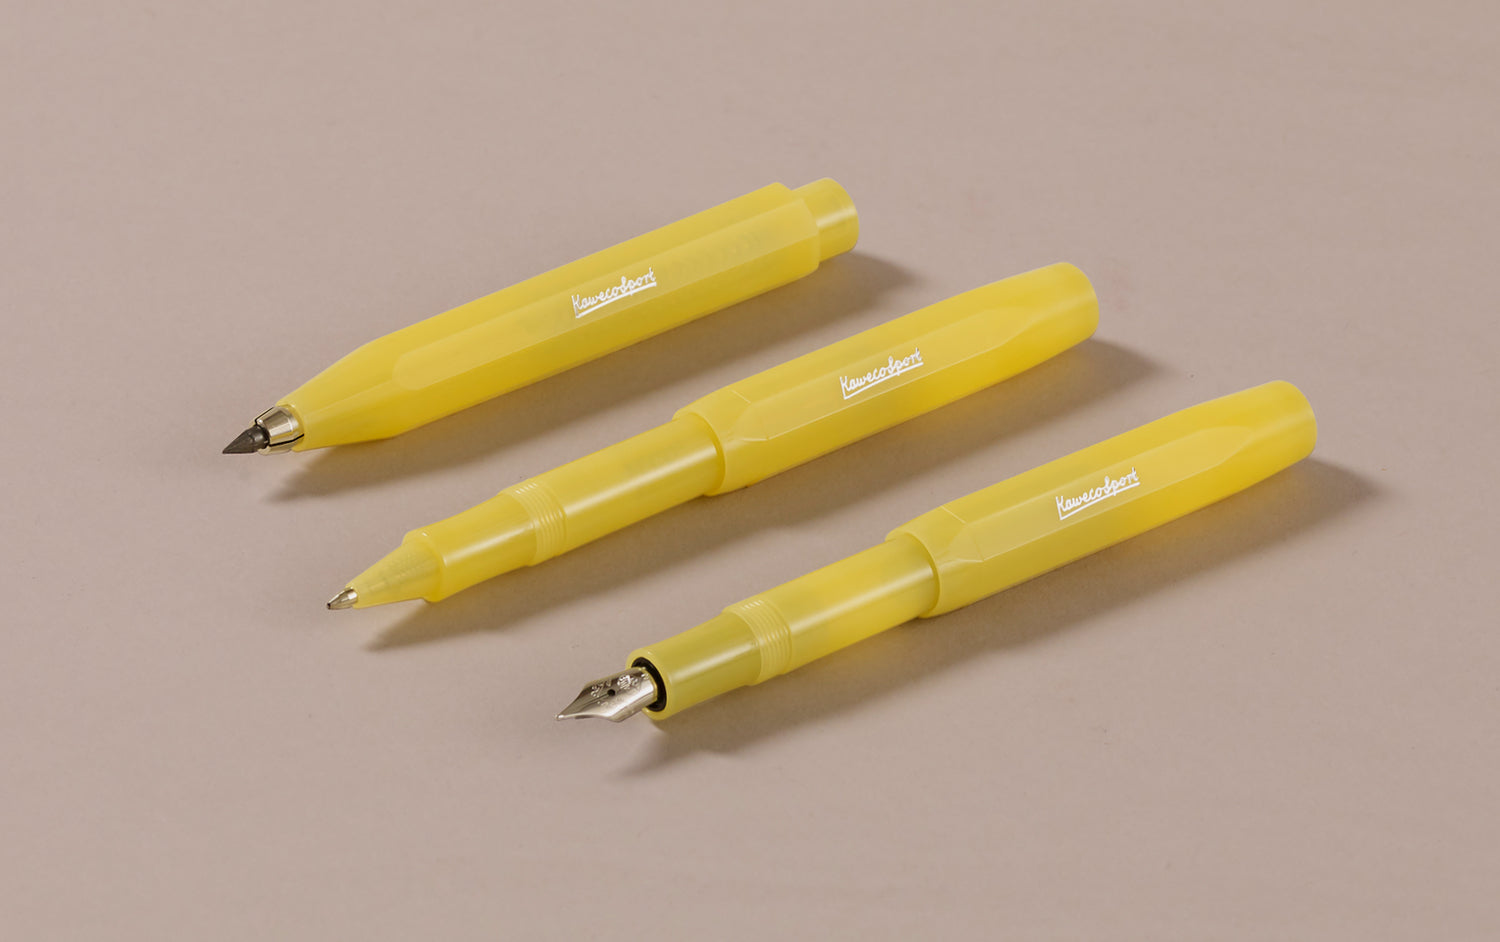 Sweet Banana Kaweco Frosted Sport Fountain Pen